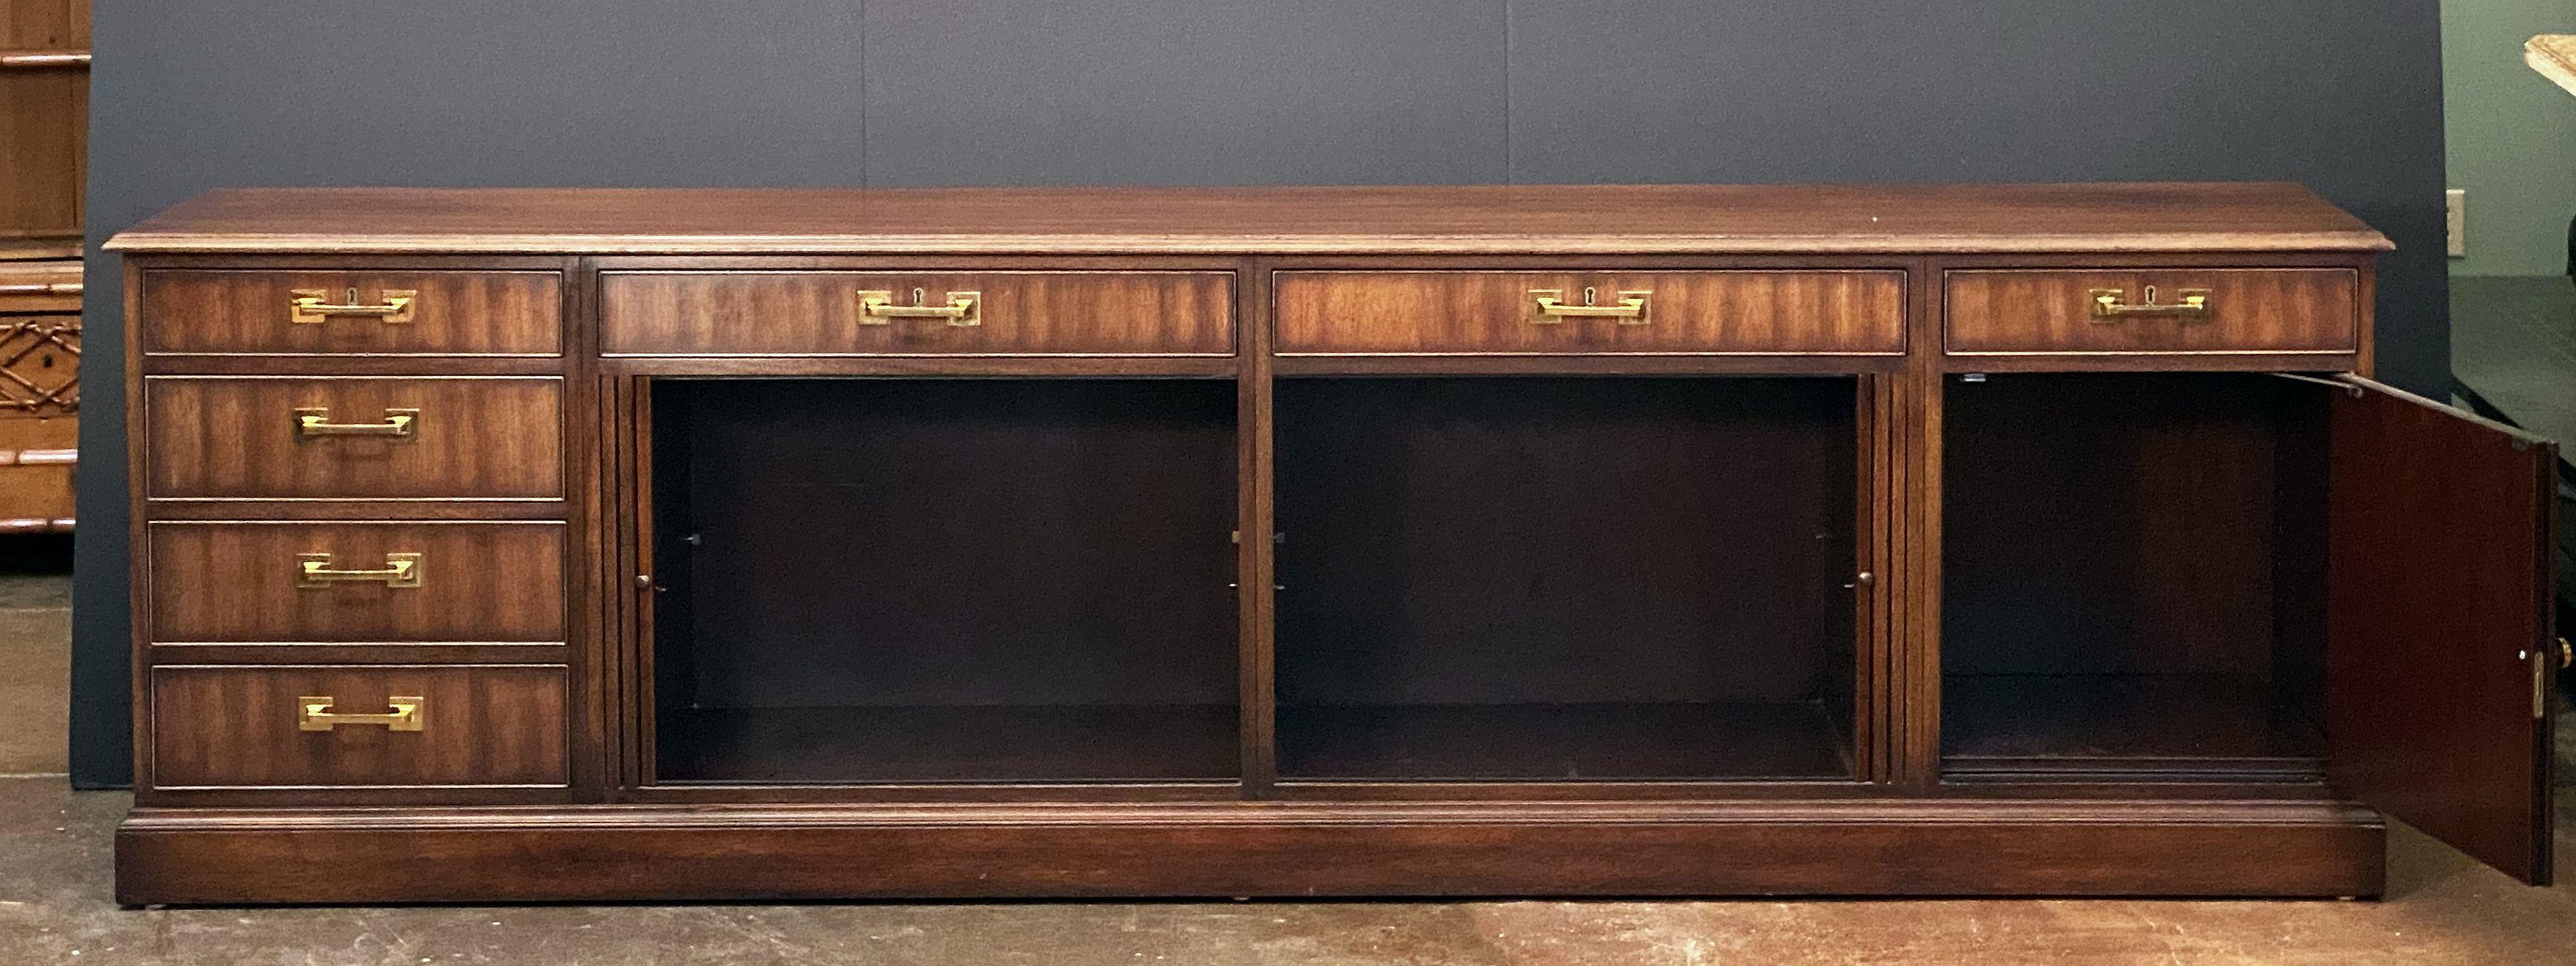 console cabinet with drawers